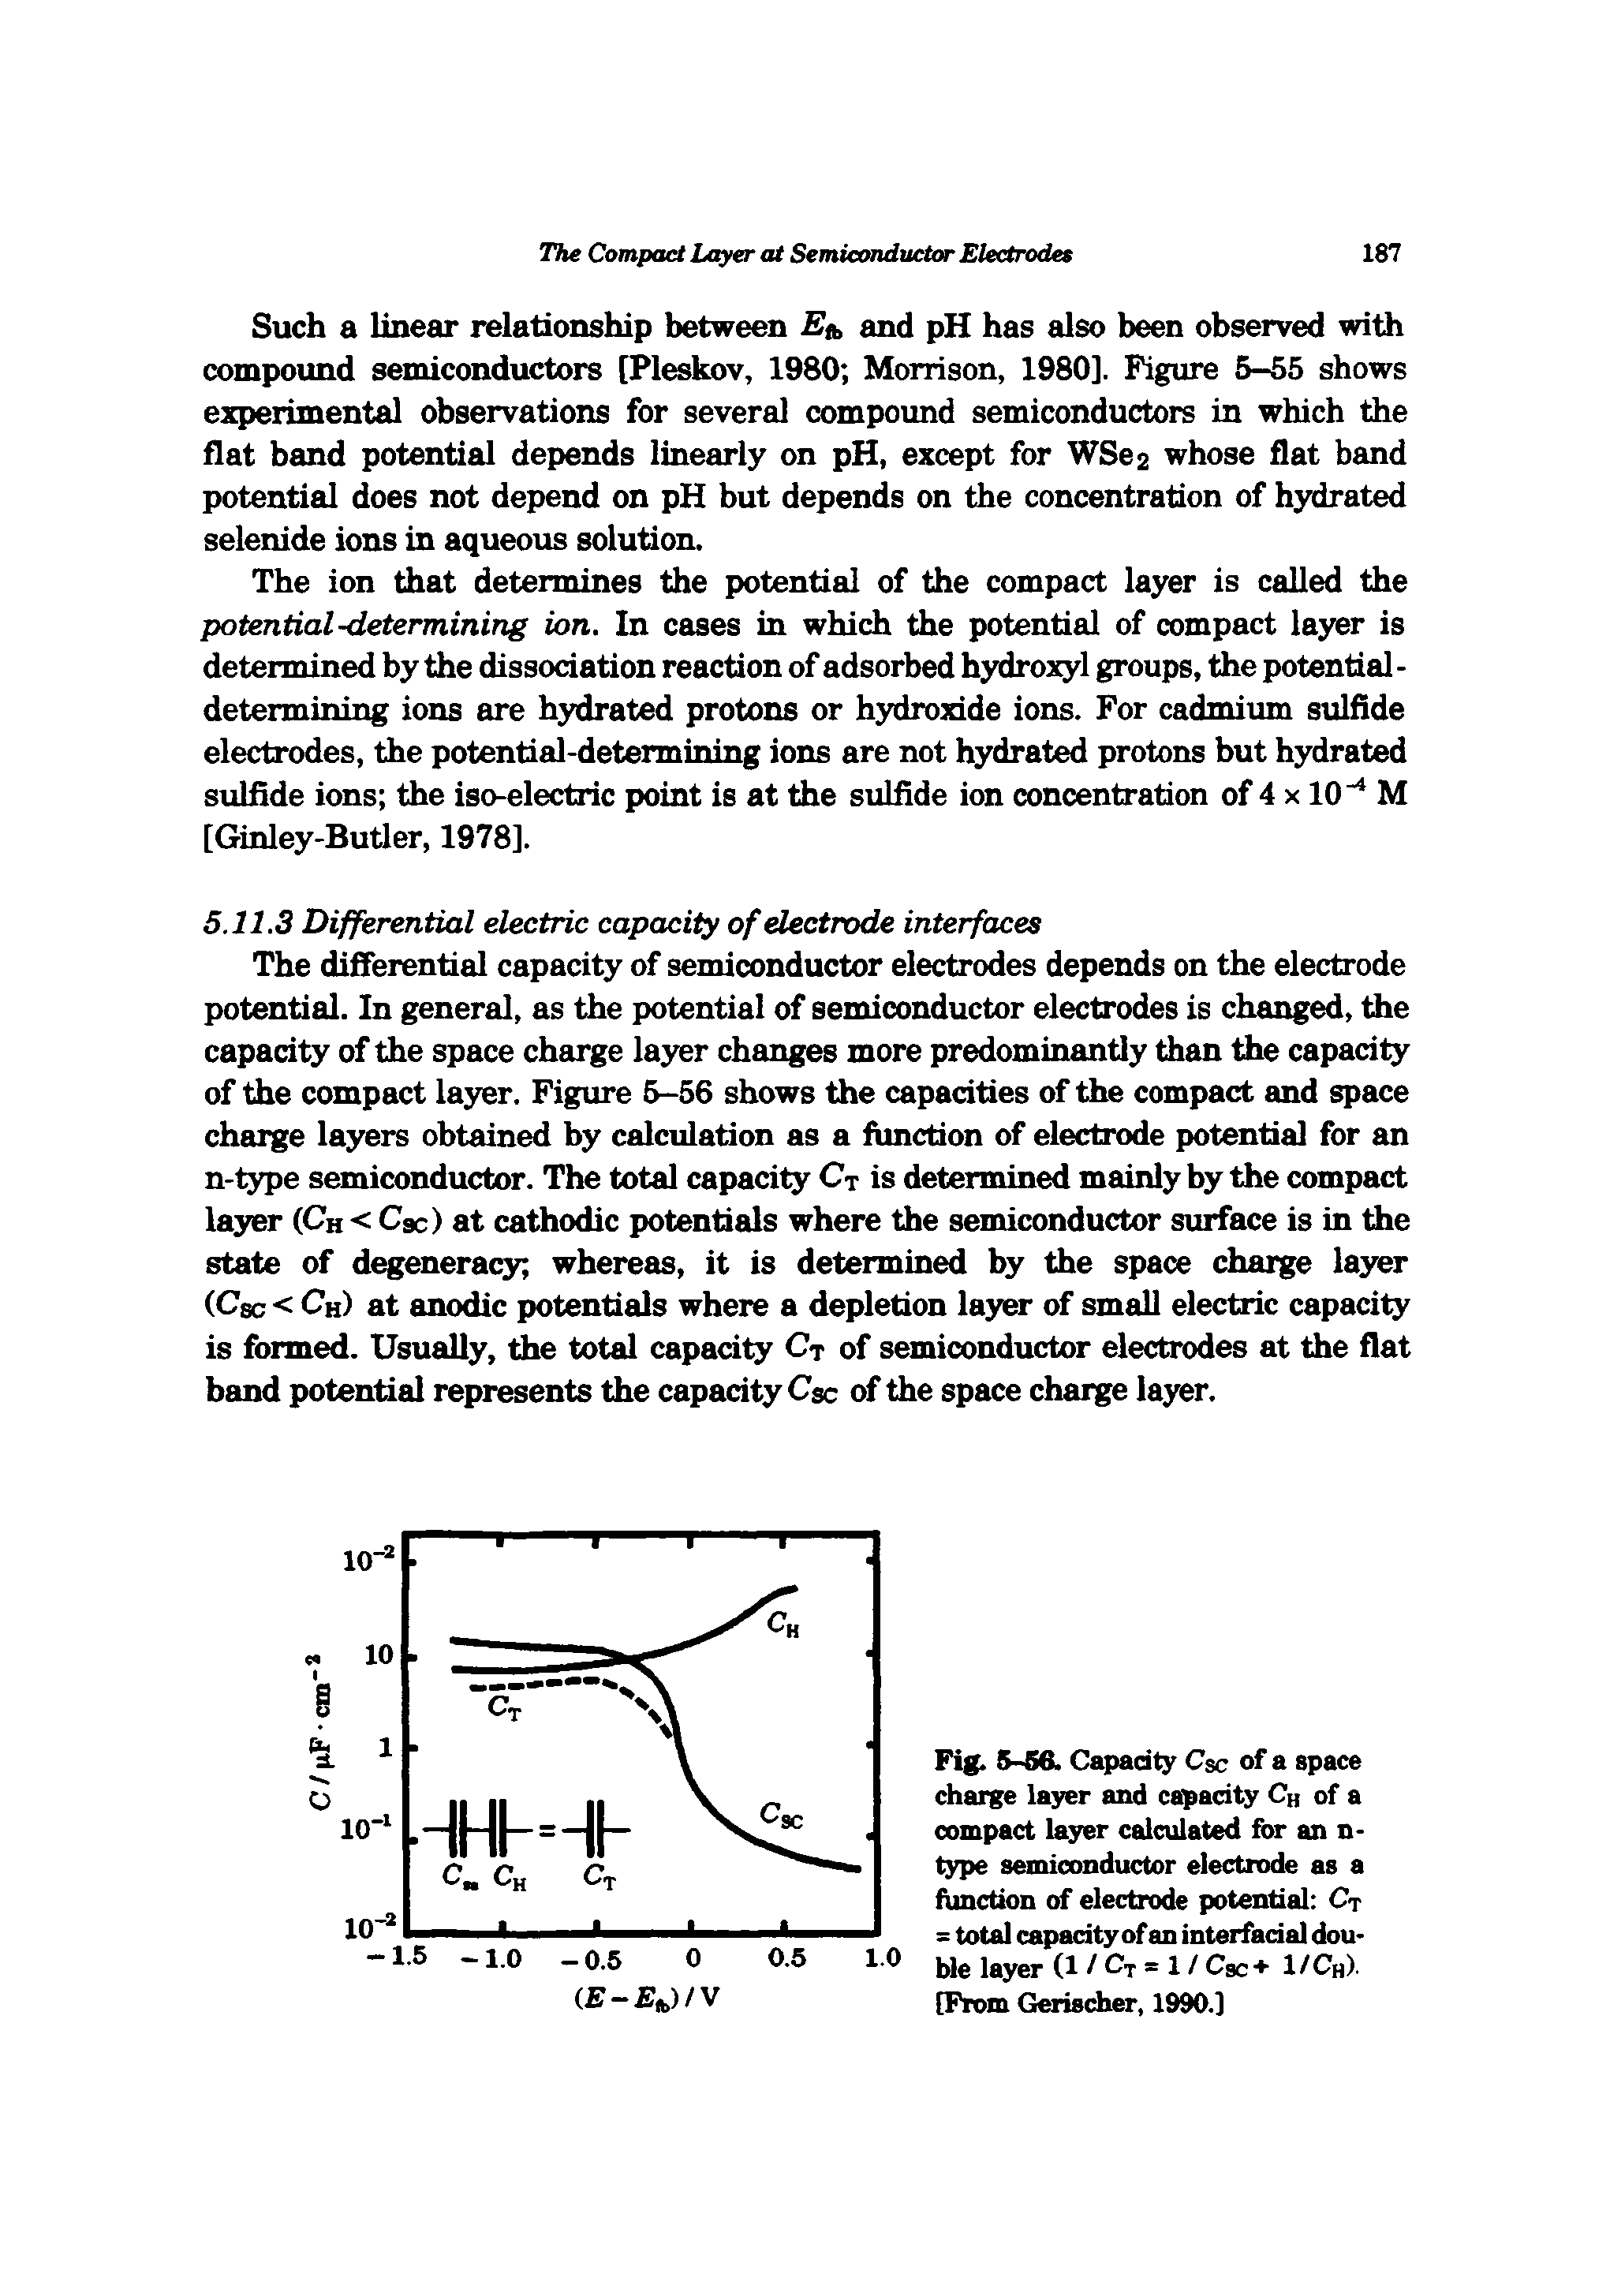 Fig. 5-56. Capacity Csc of a space charge layer and capacity Ch of a compact layer calculated for an n-type semiconductor electrode as a function of electrode potential Ct = total capacity of an interfadal double layer (1/Ct = 1/ Csc+ 1/Ch). [From Gerisdier, 1990.]...